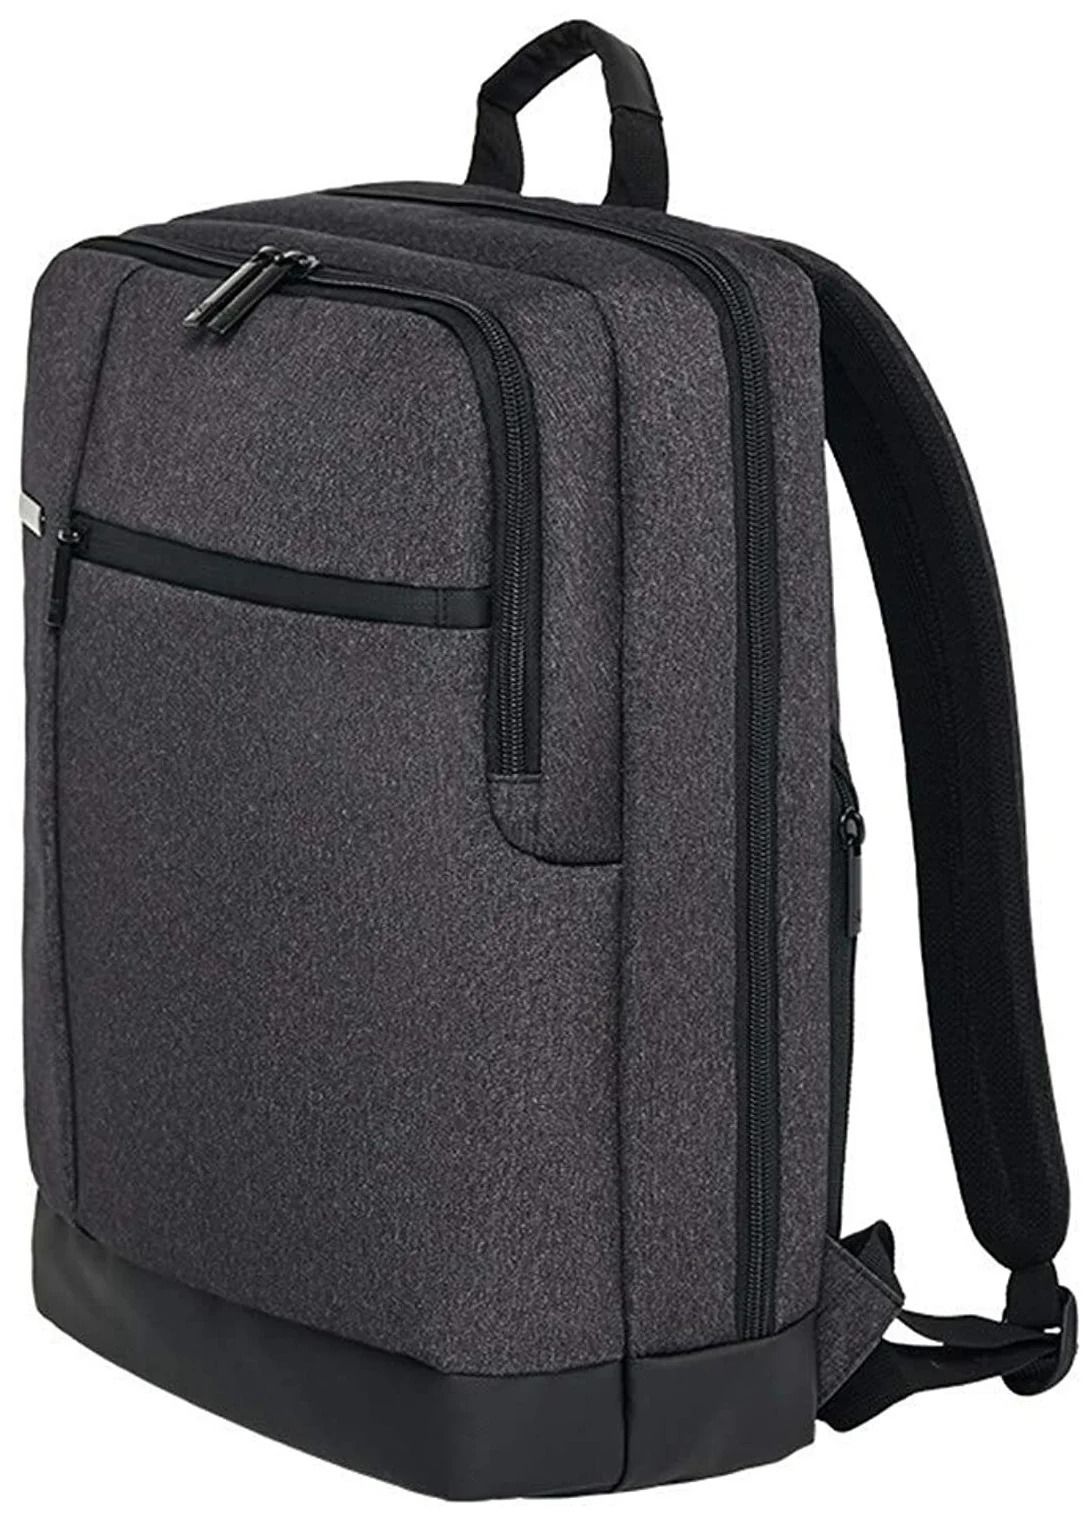 Рюкзак Xiaomi 90 Points Classic Business Backpack Dark Grey рюкзак xiaomi 90 points grinder oxford casual backpack розовый